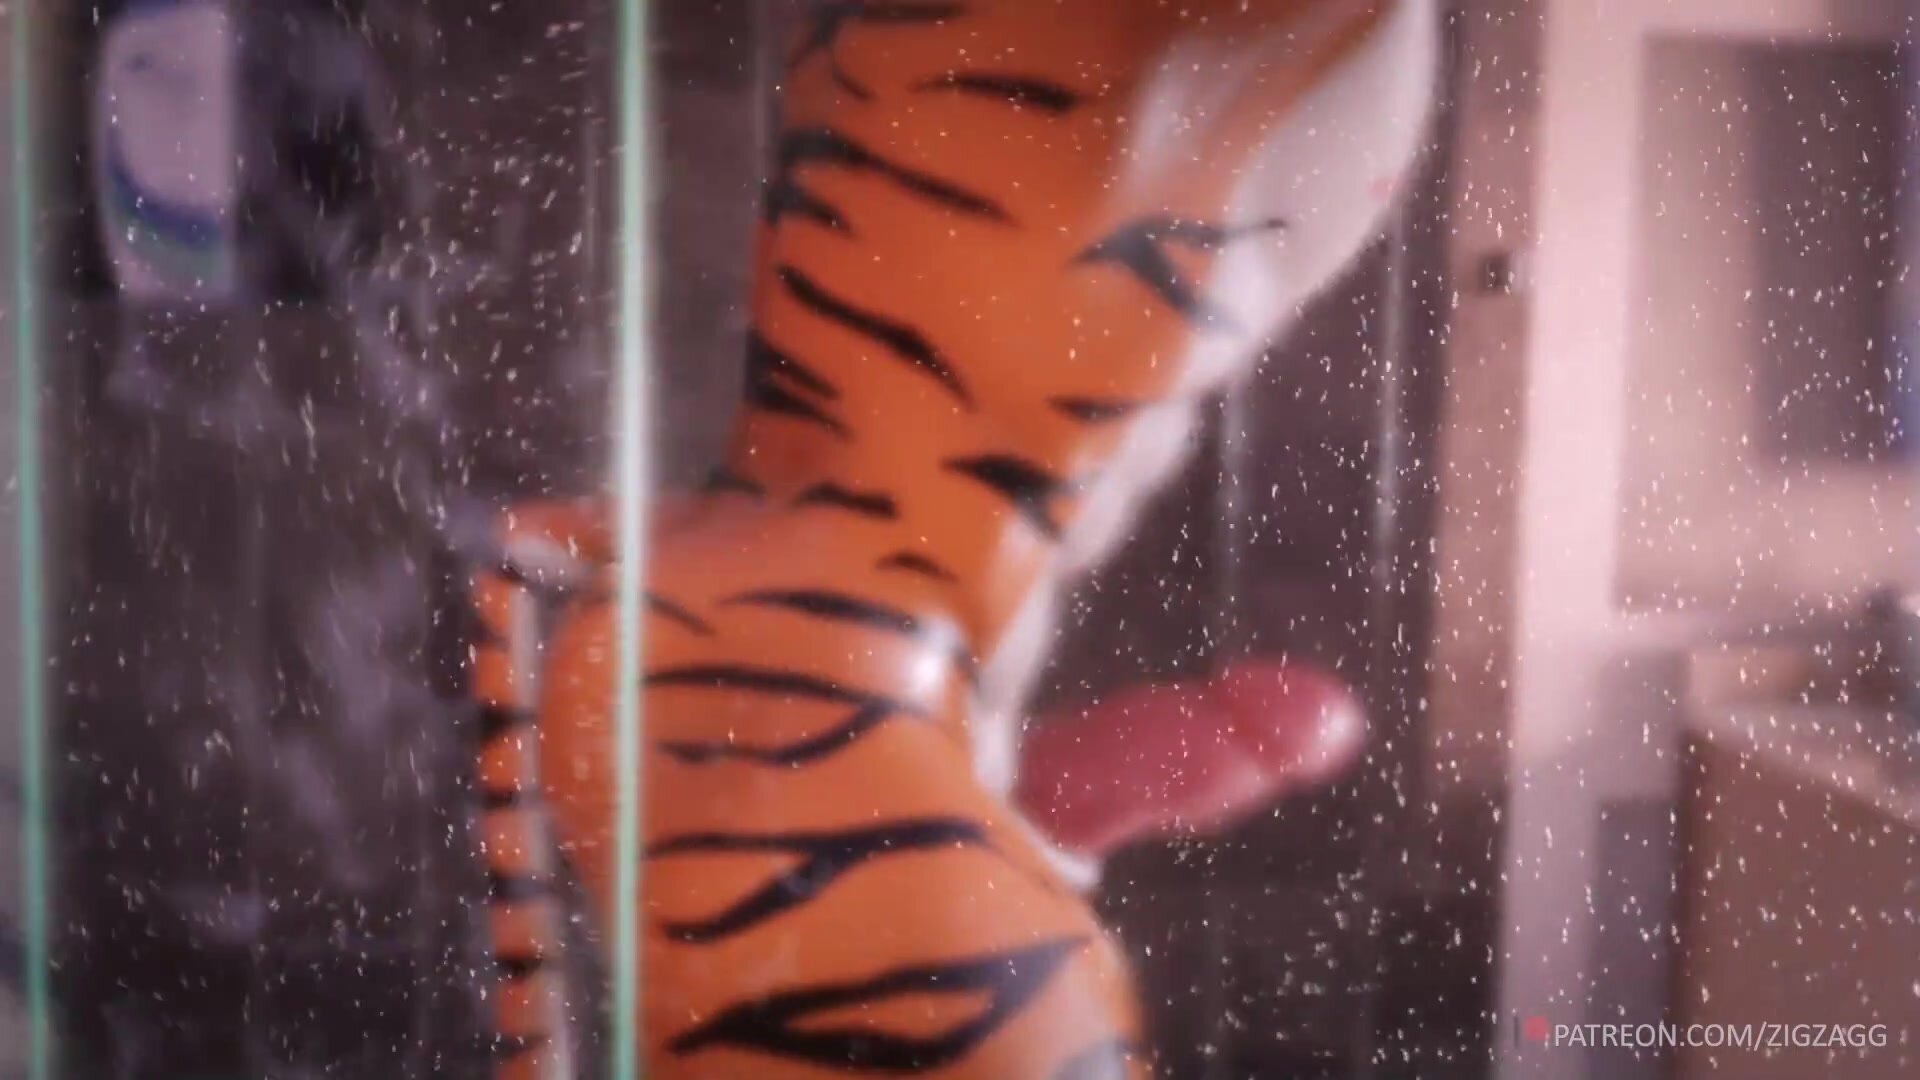 Tiger peeing in the shower